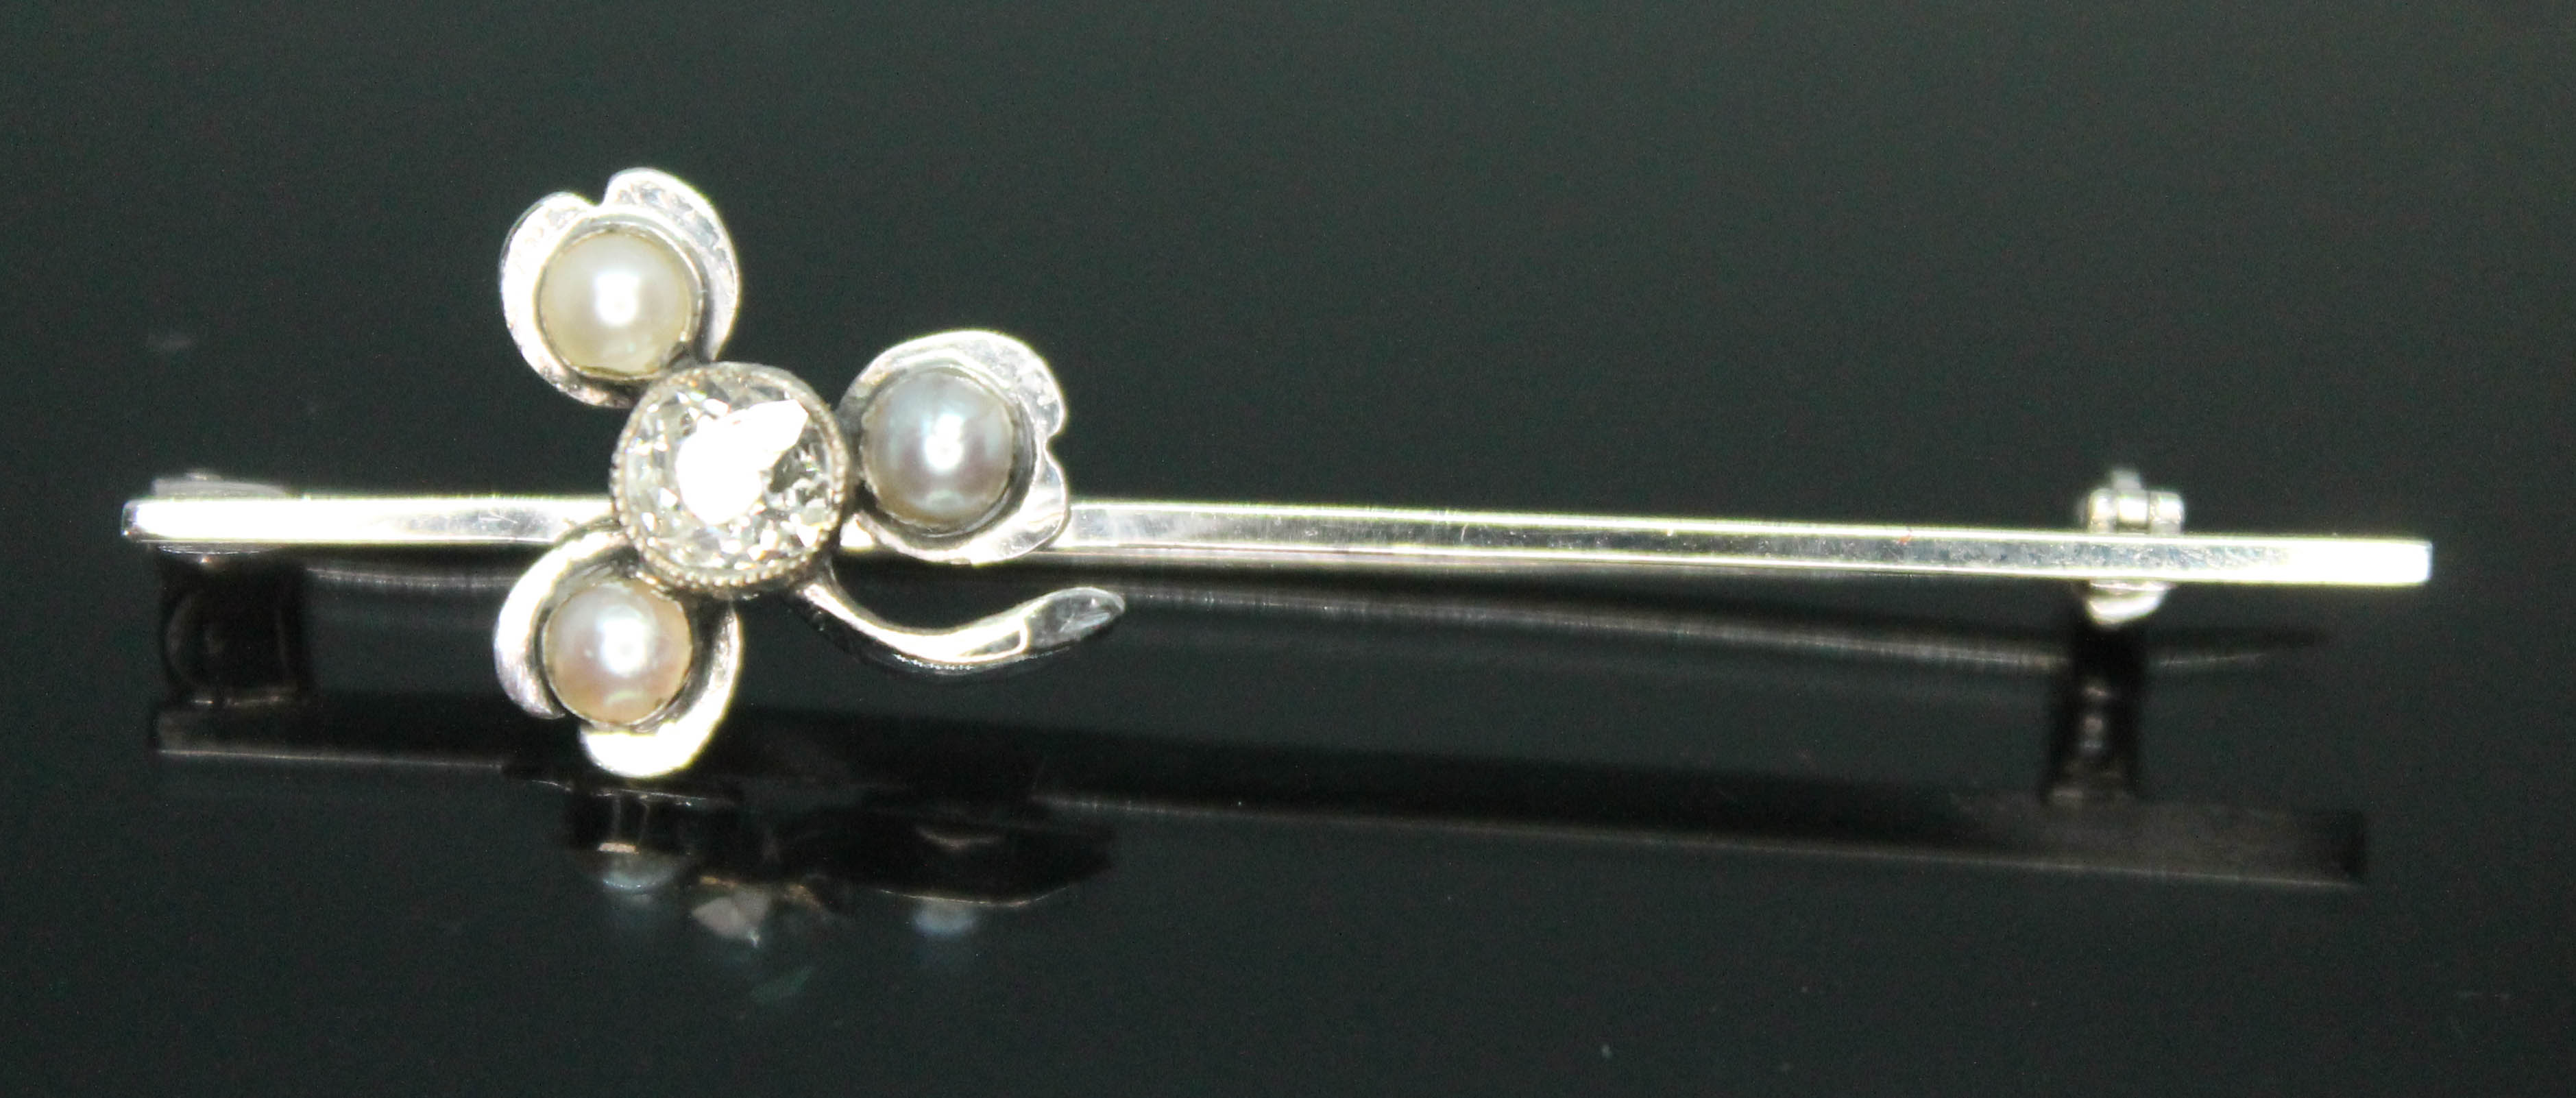 An Art Deco white metal bar brooch with applied shamrock set with three split pearls and a central